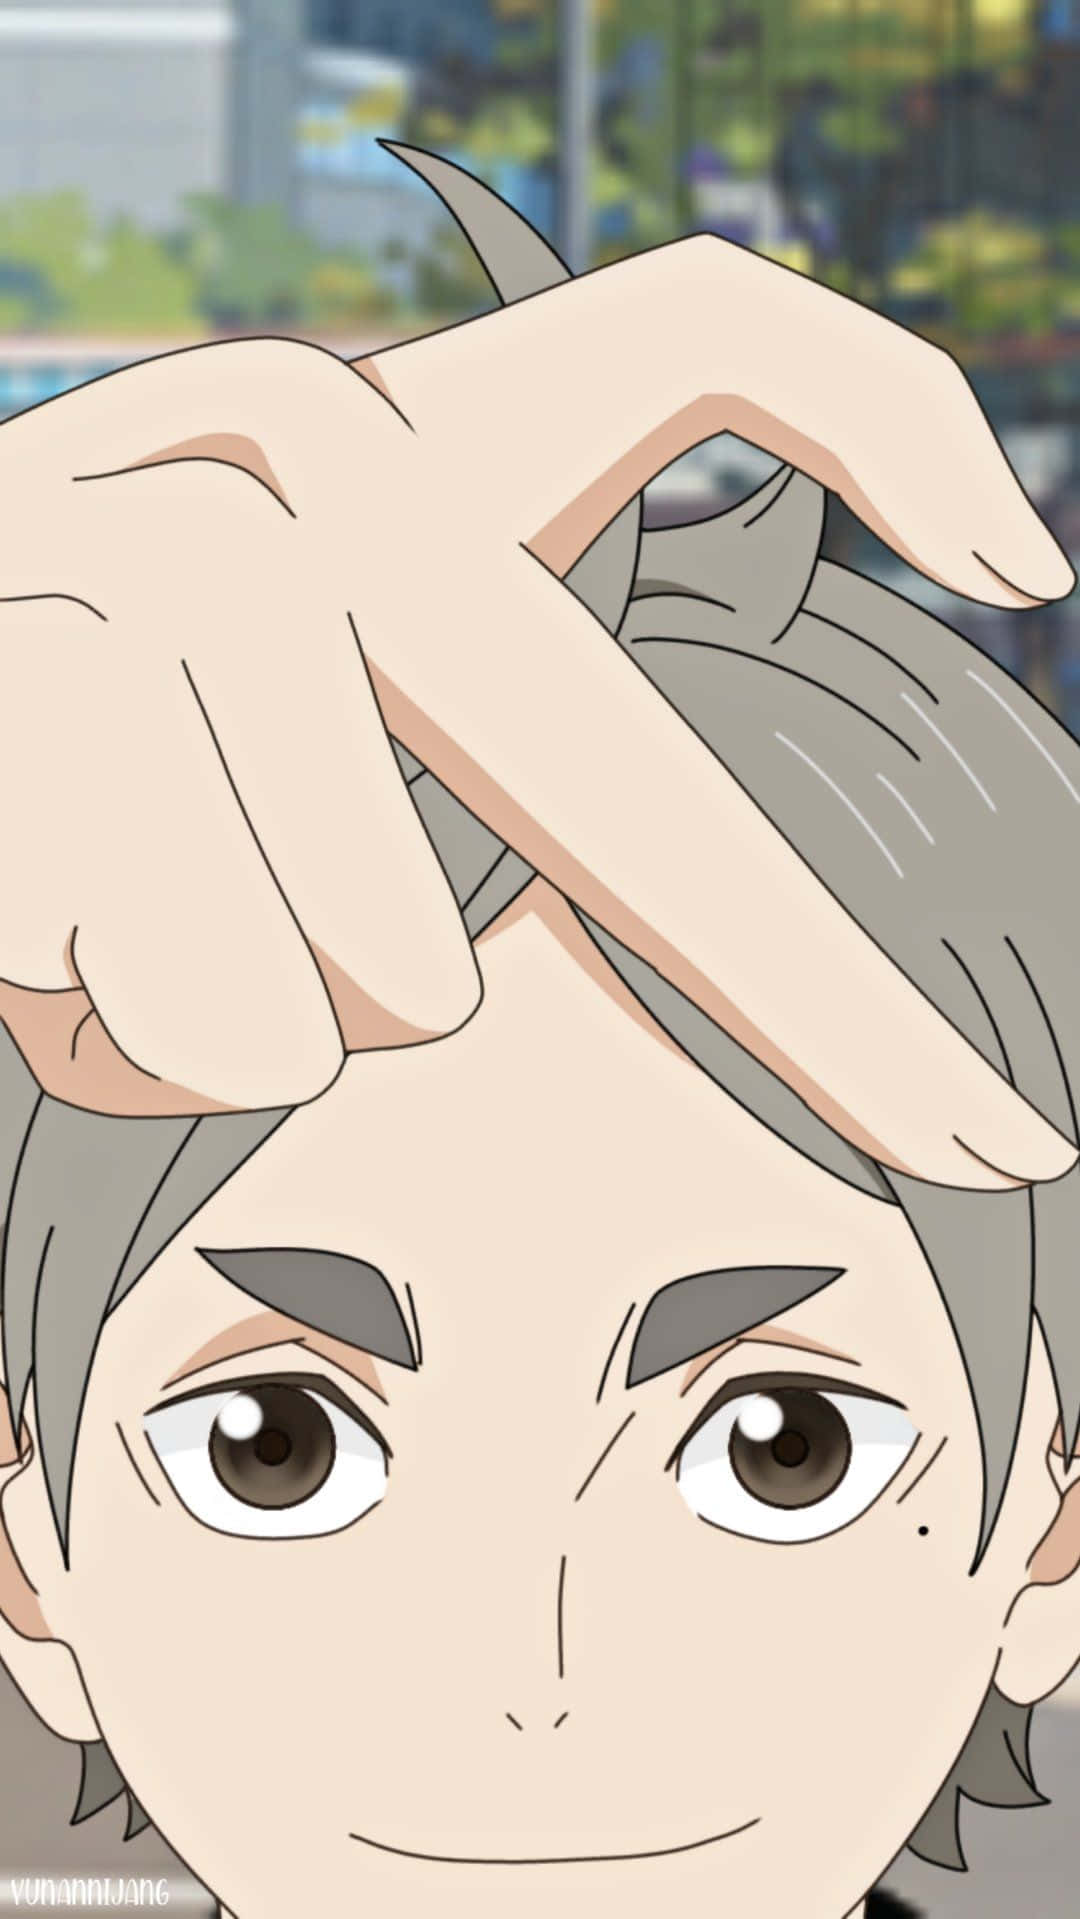 Haikyuu Character Smiling With Hand On Head Wallpaper